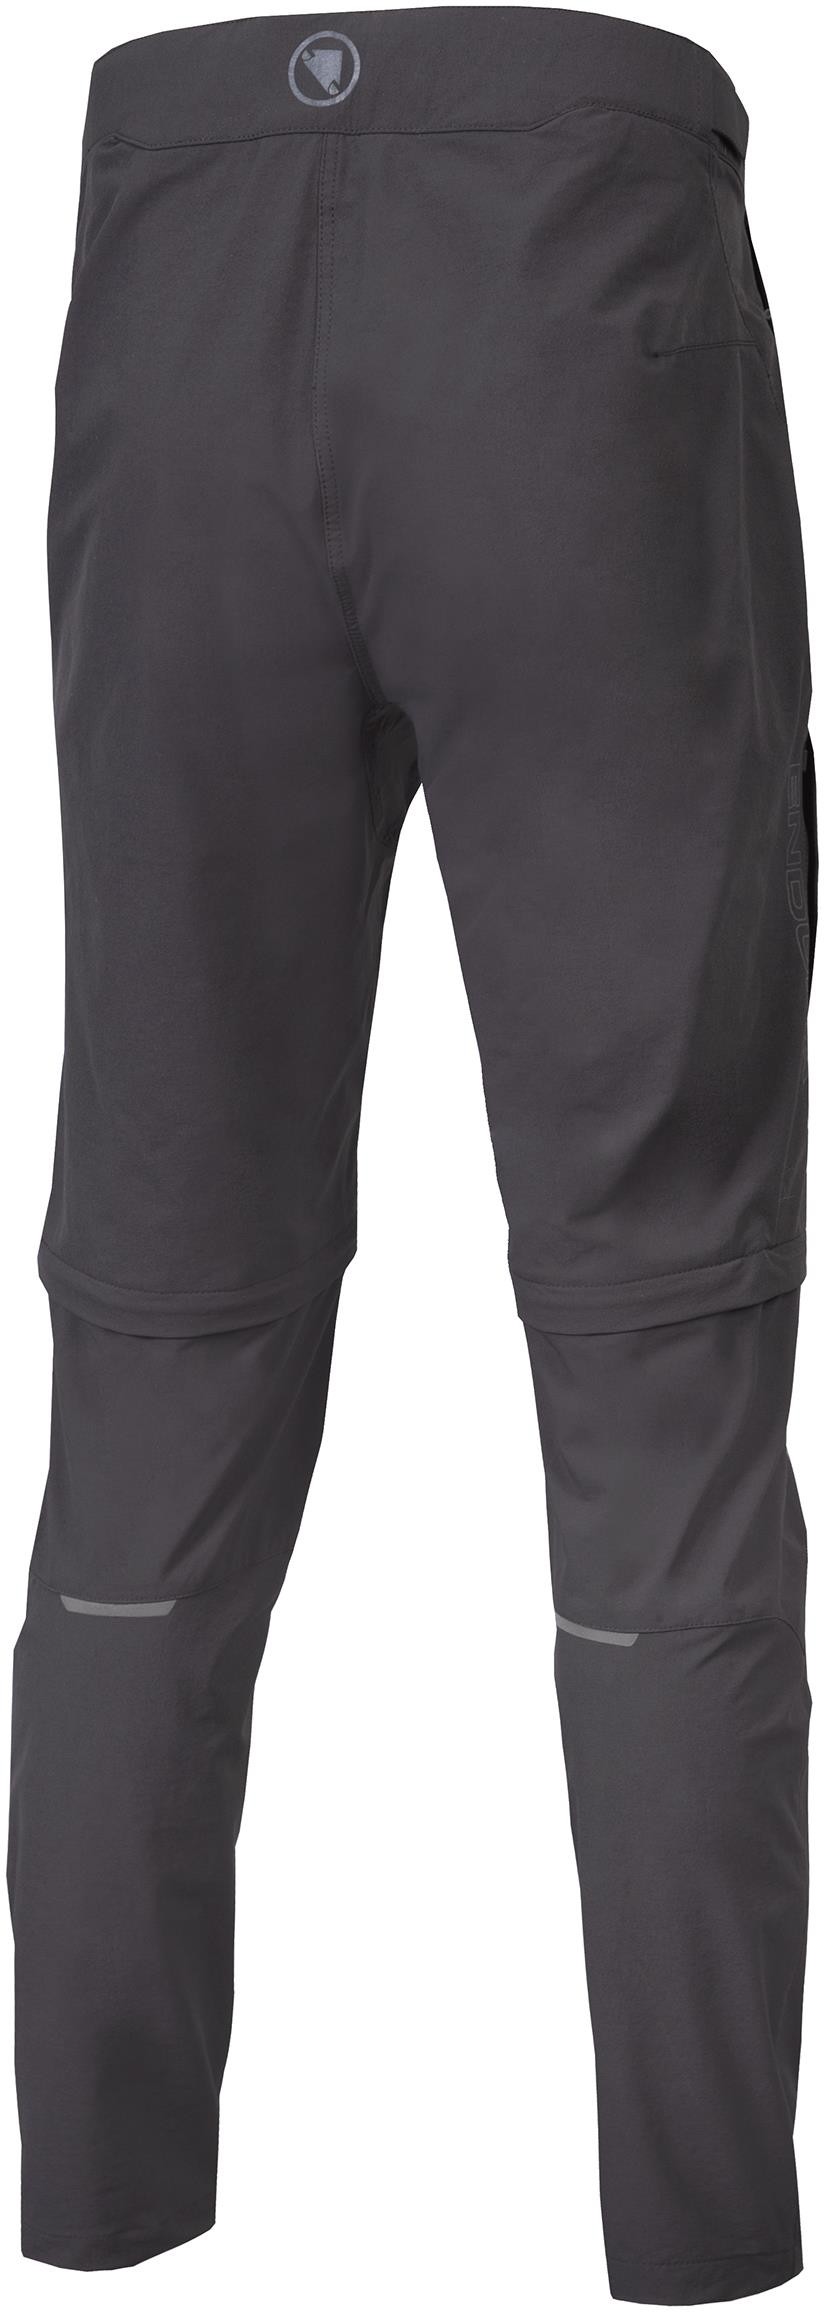 GV500 Zip-off Trousers image 1